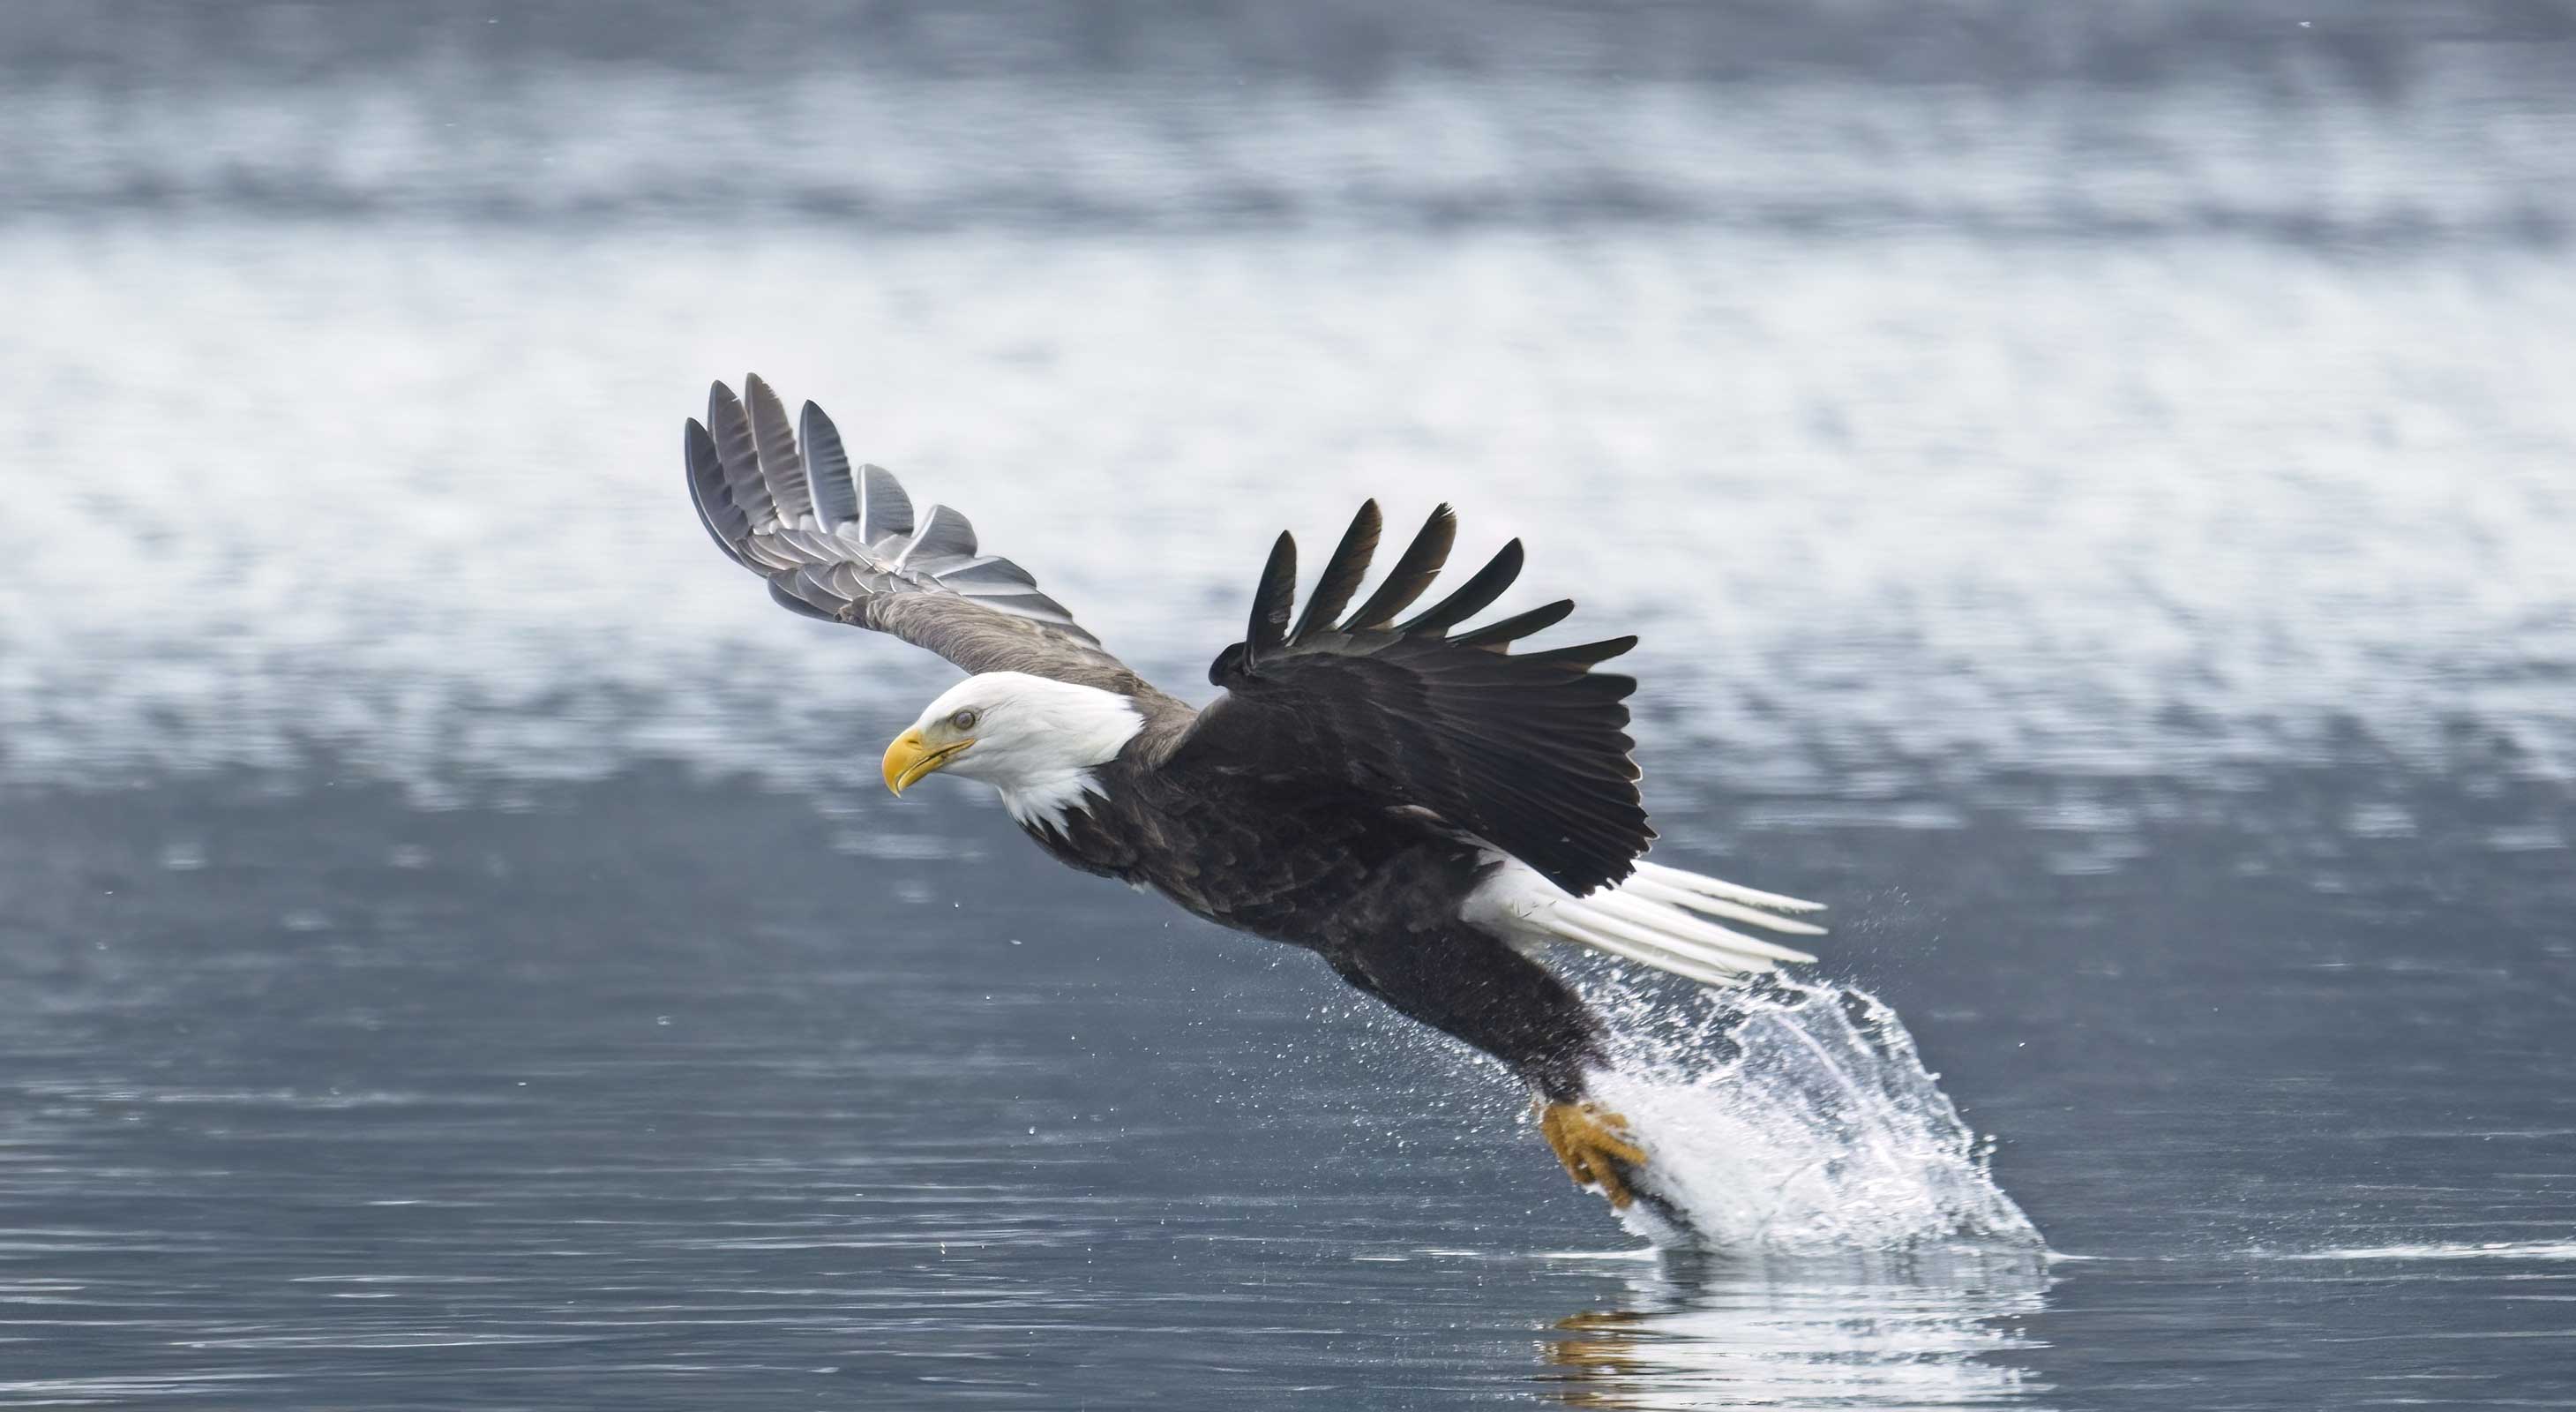 Bald eagle skimming water and catching fish